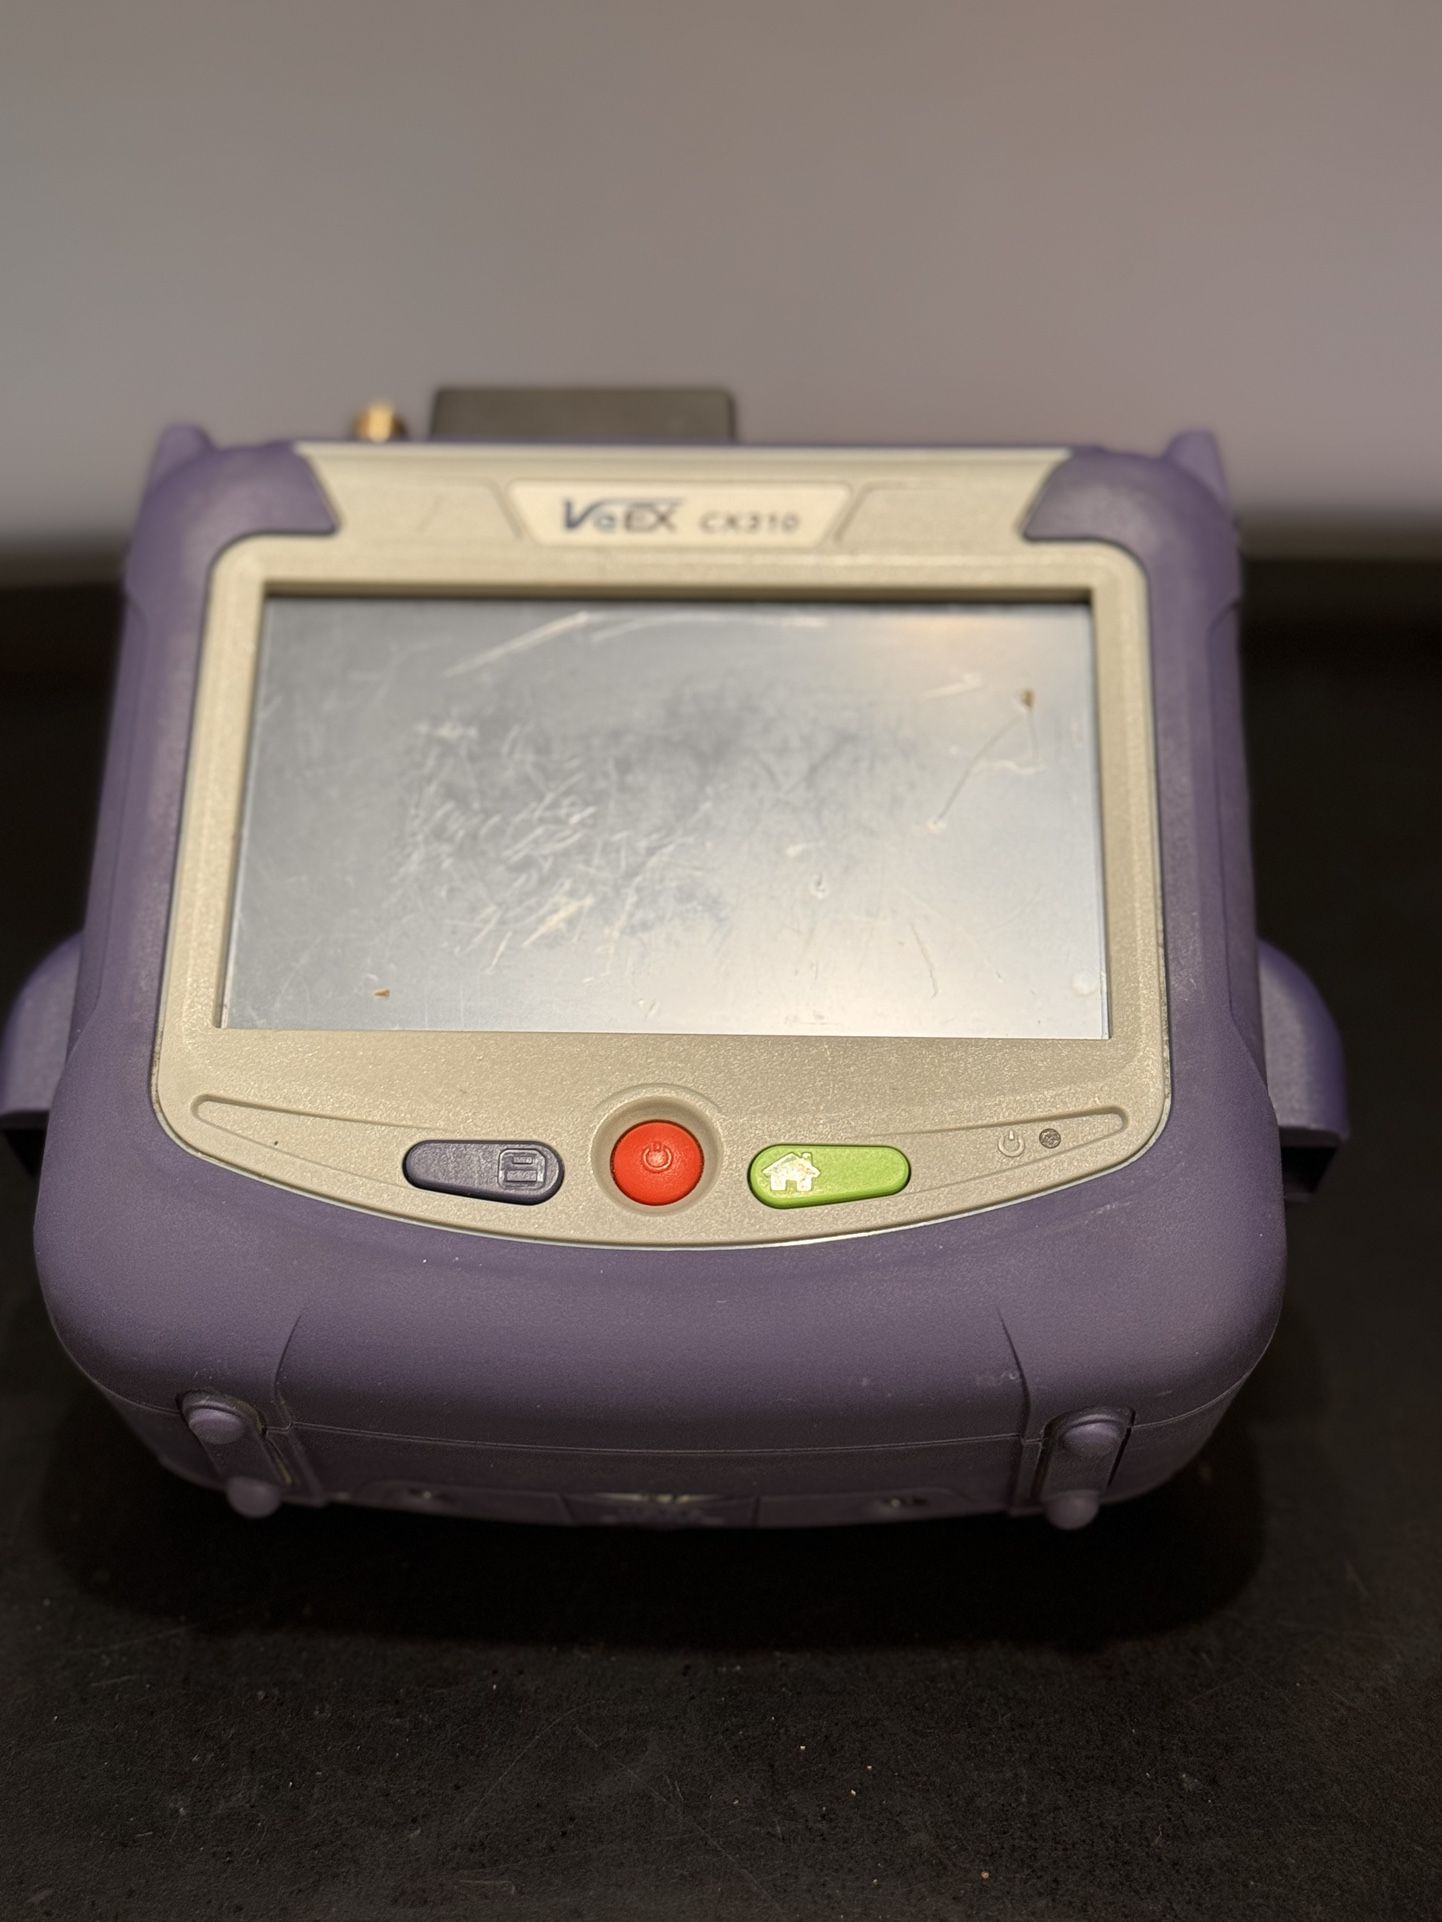 VeEX Cx310 Cable meter For Parts 